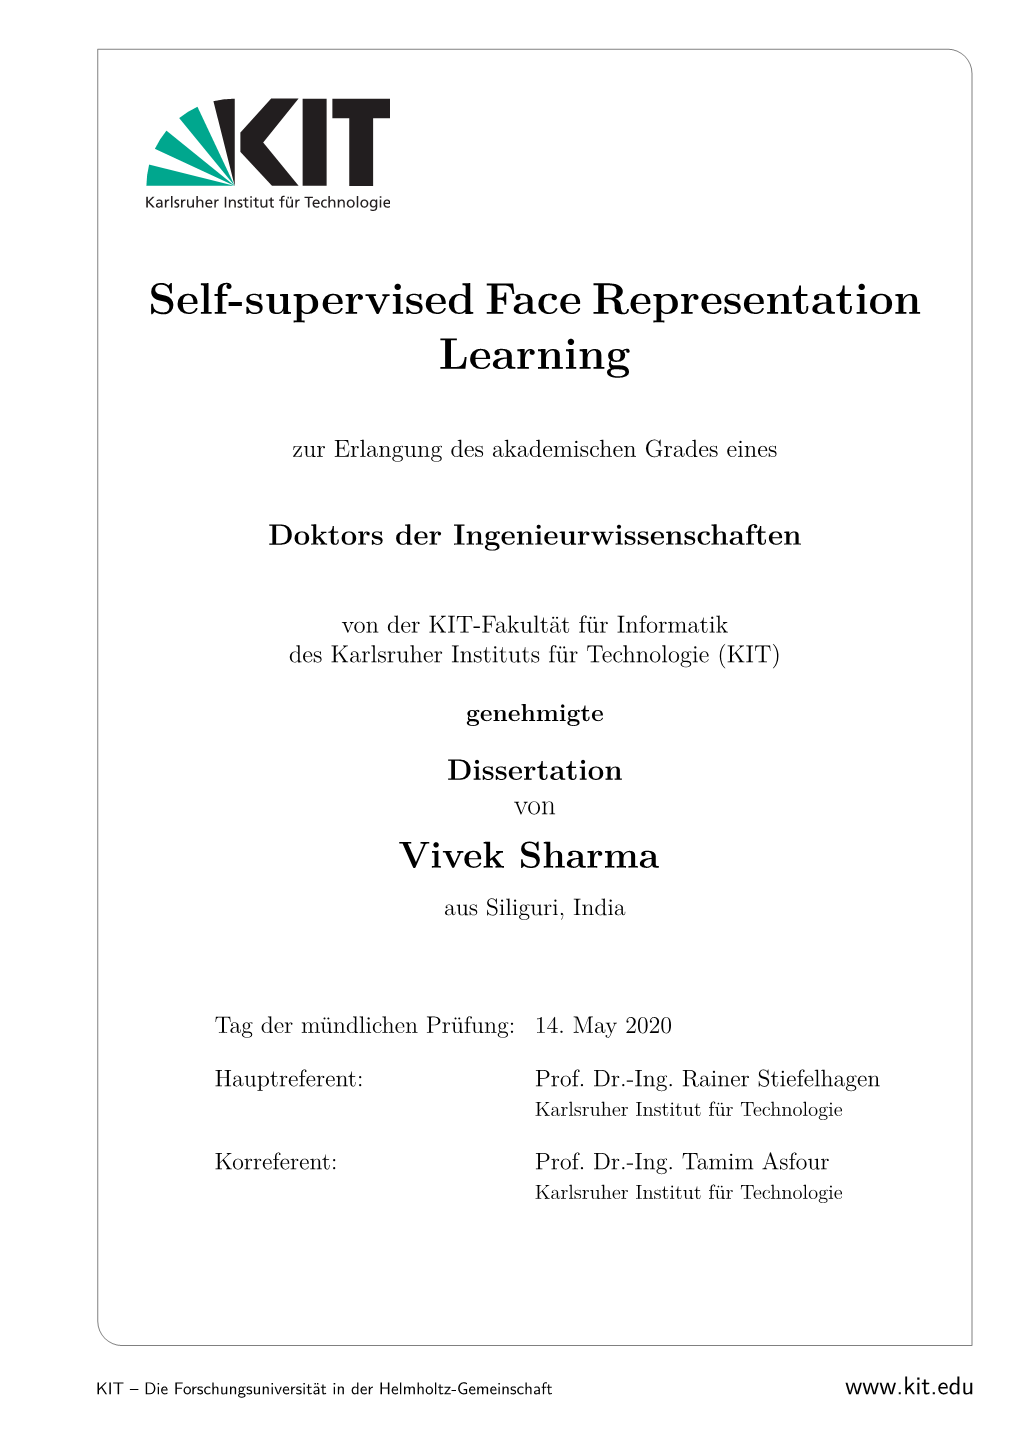 Self-Supervised Face Representation Learning